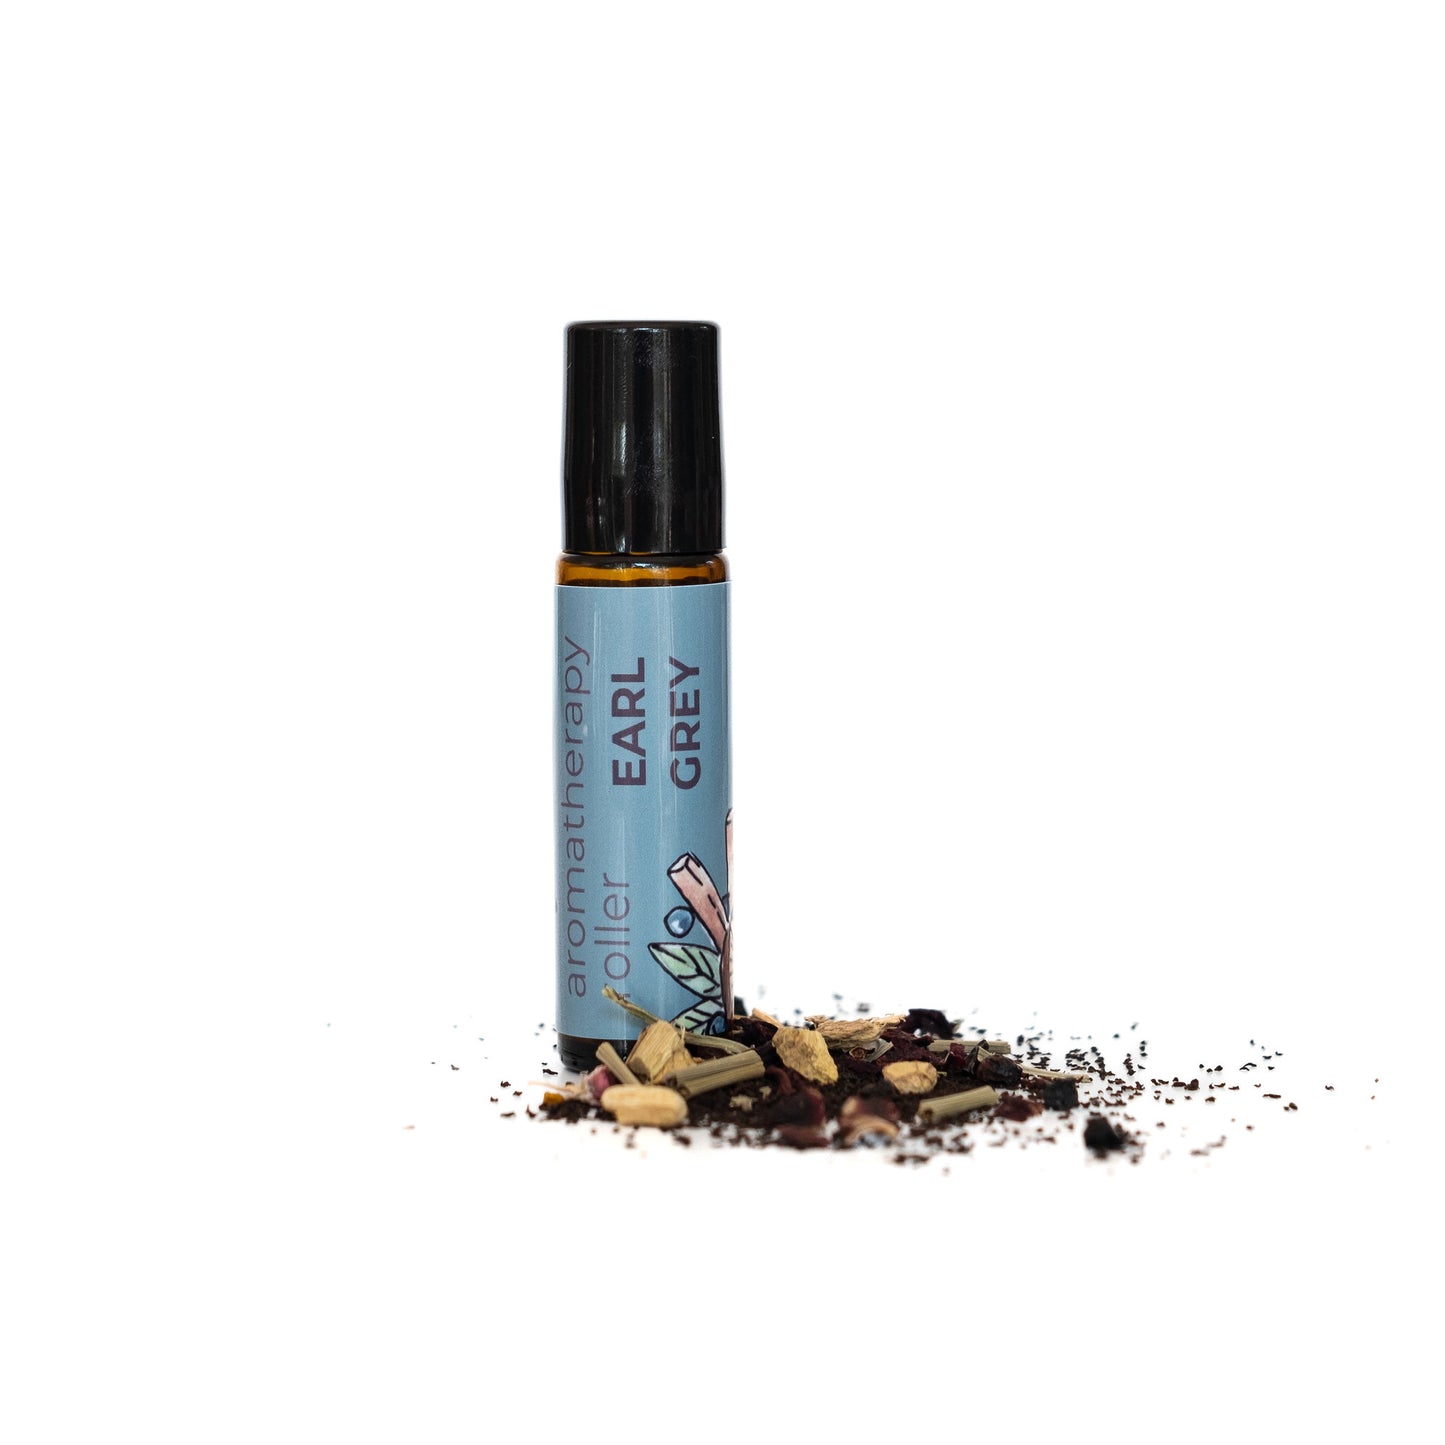 Travel sized Earl Grey scented aromatherapy roller for small moments of joy.